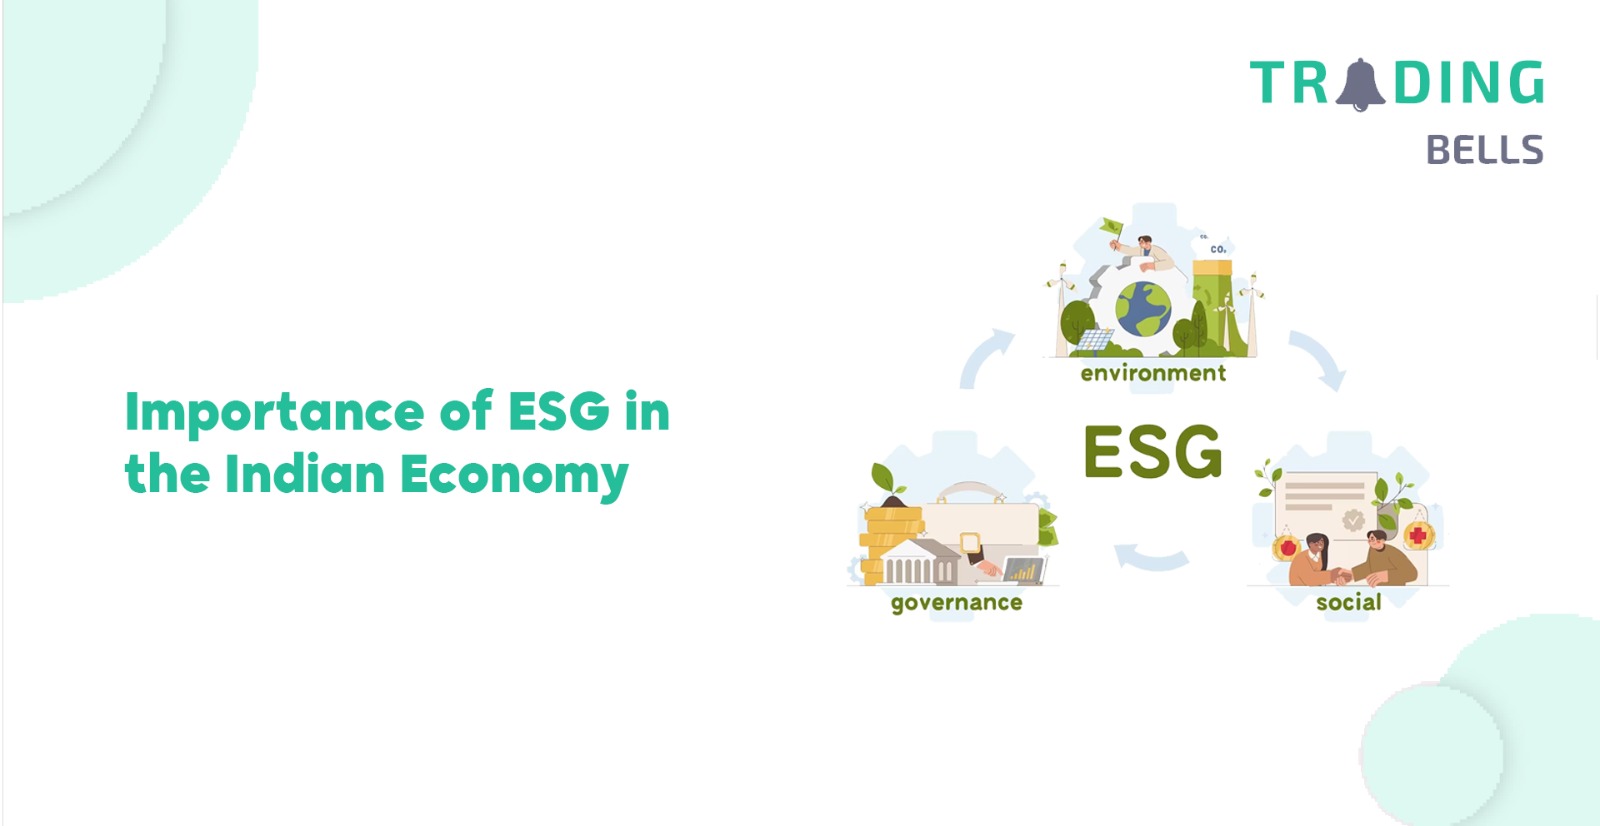 Importance of ESG in the Indian Economy